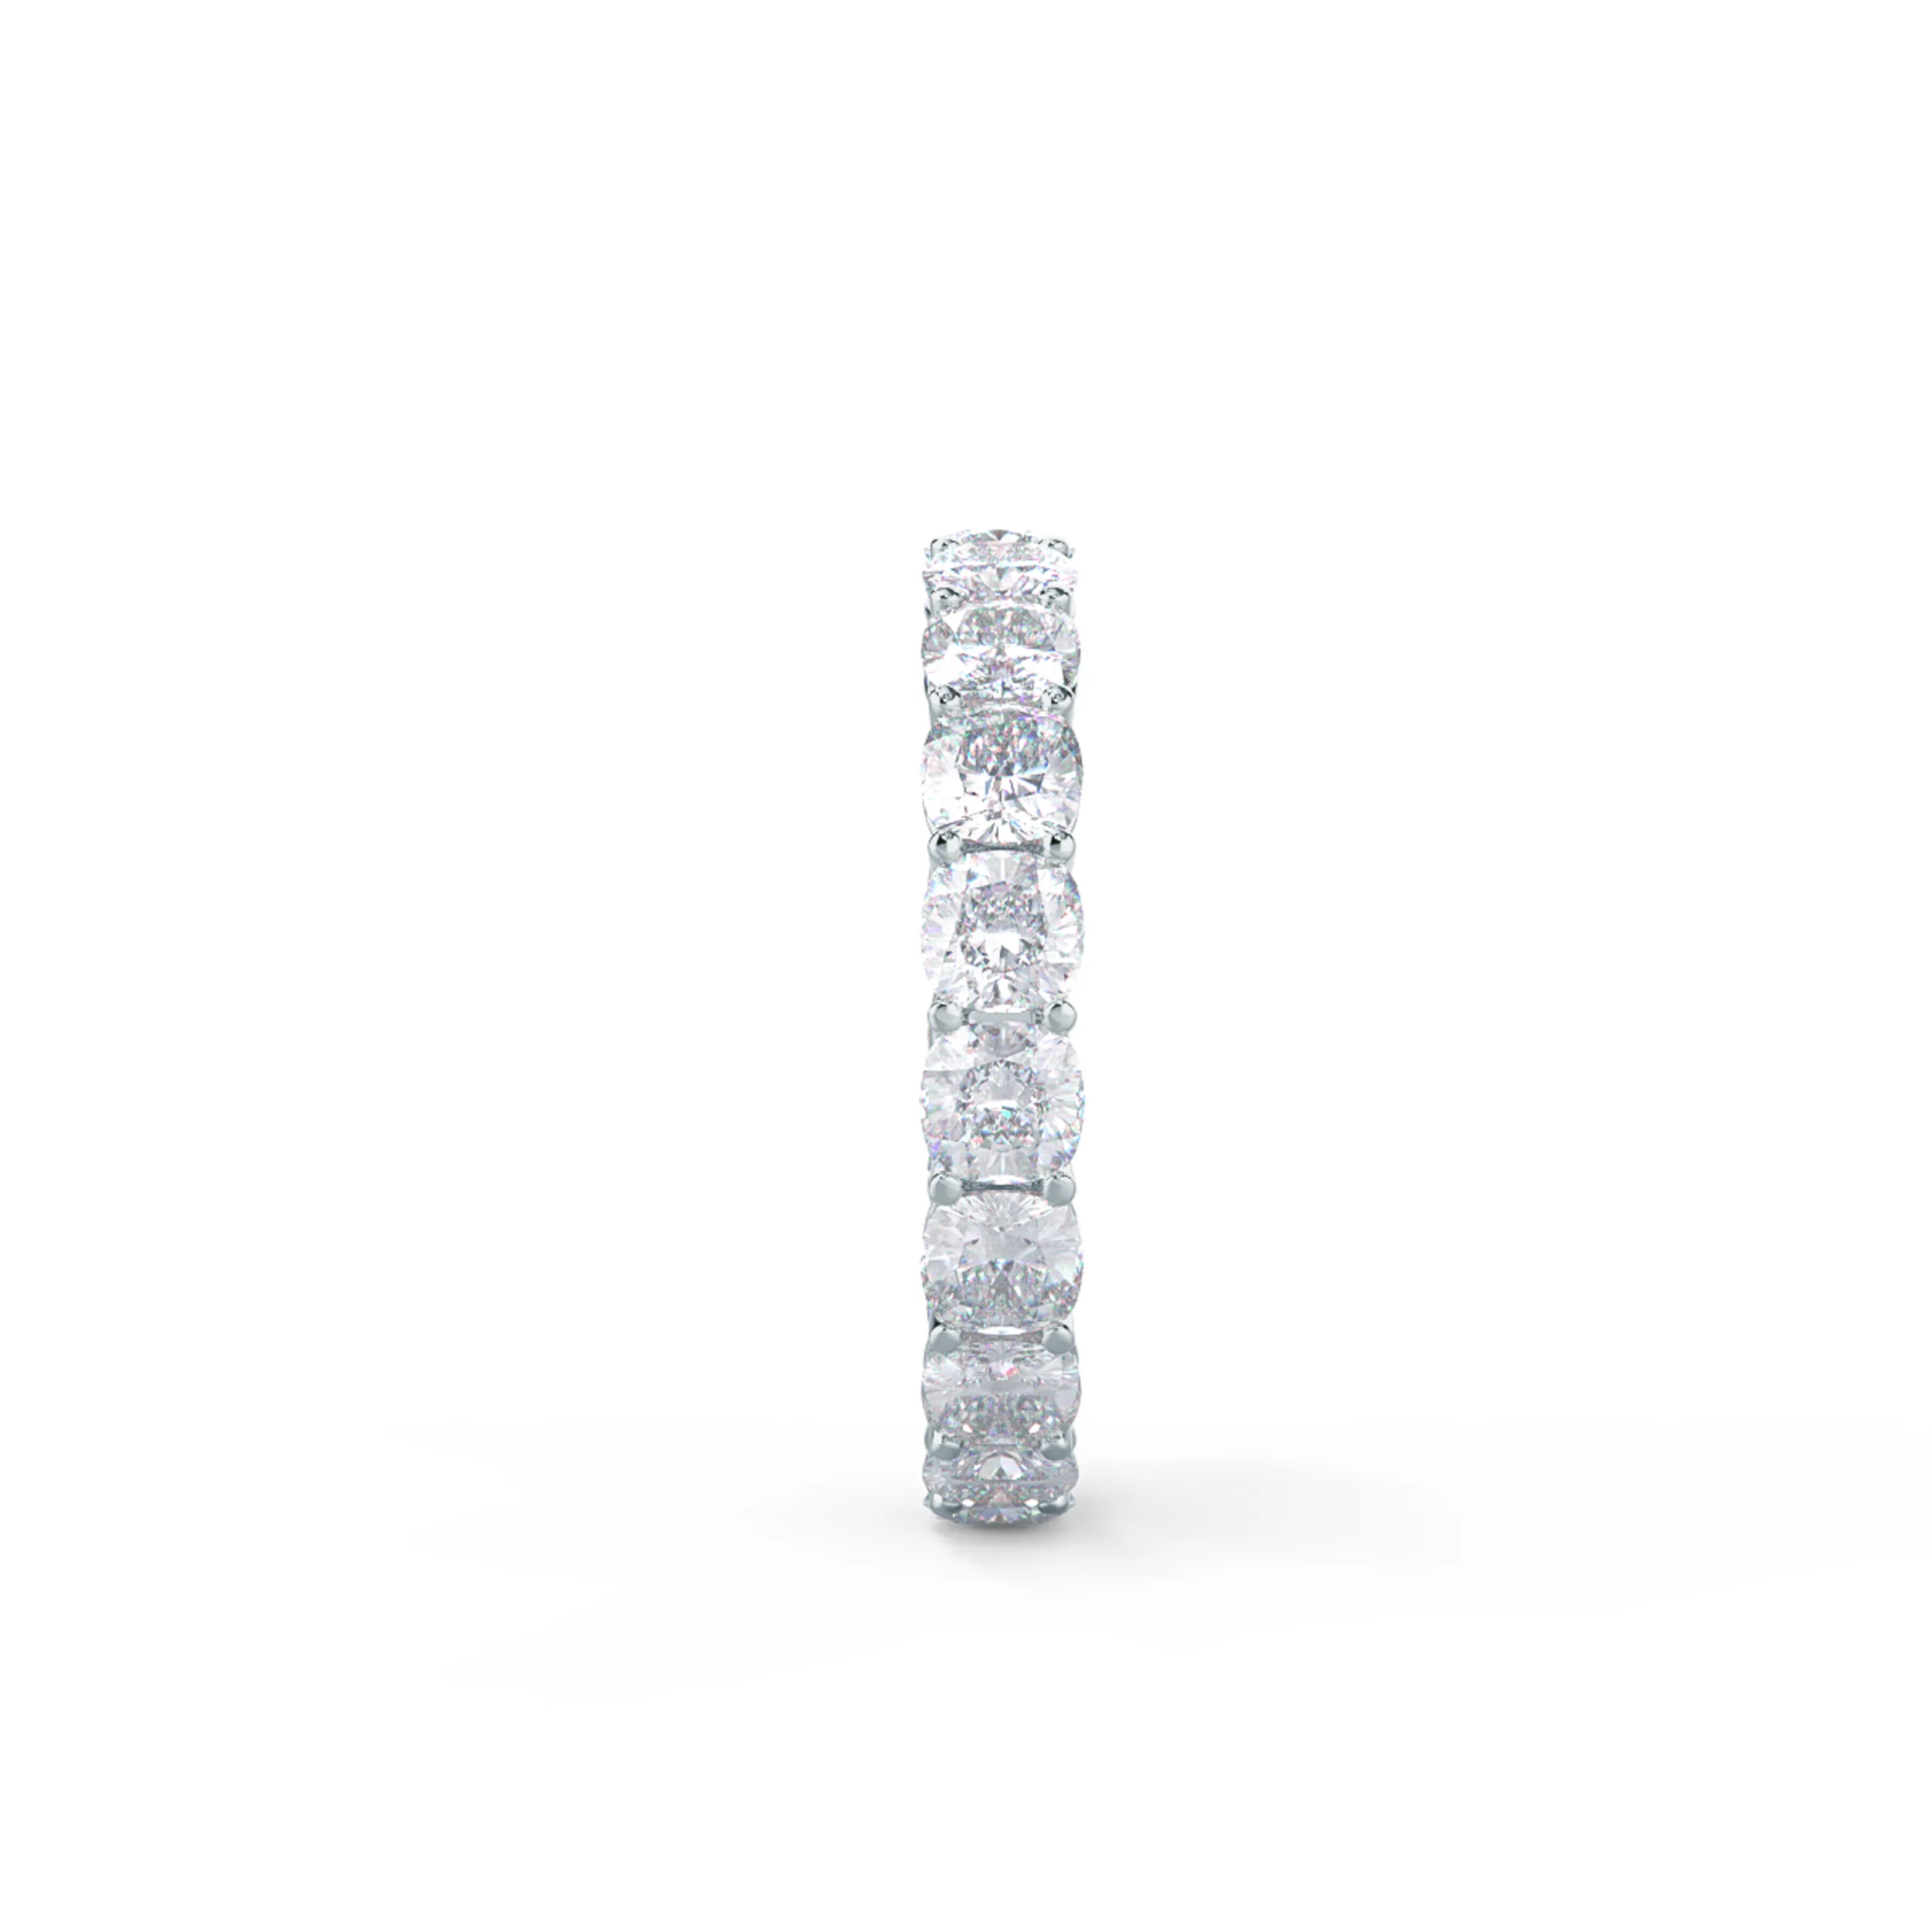 High Quality 4.75 ct Lab Diamonds Cushion Eternity Band in 18 Karat White Gold (Side View)